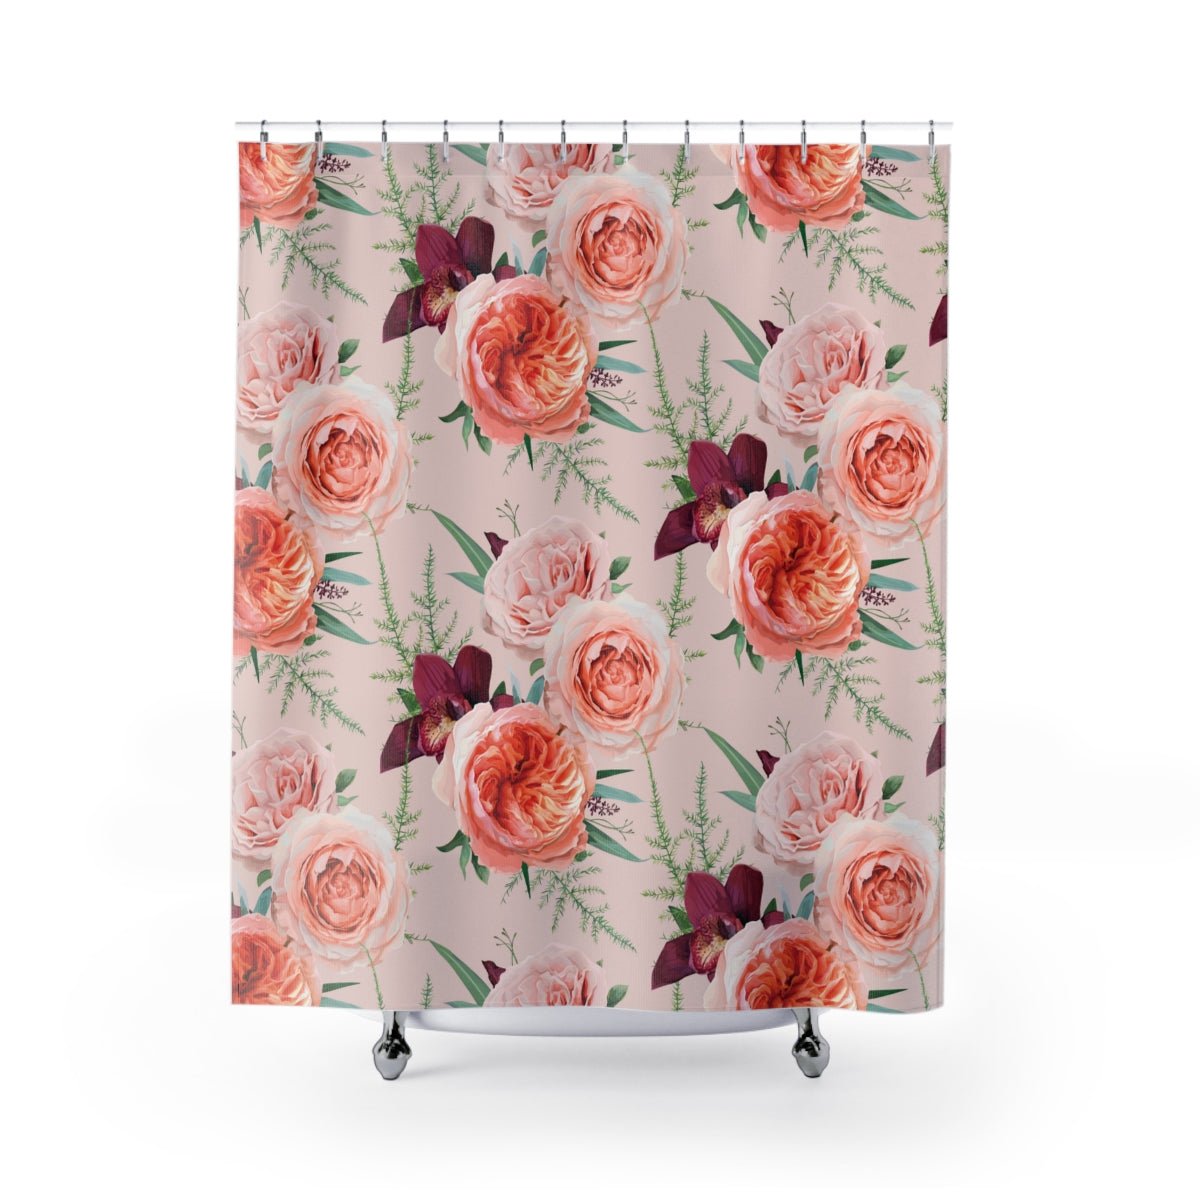 Blush Roses Shower Curtain - Puffin Lime